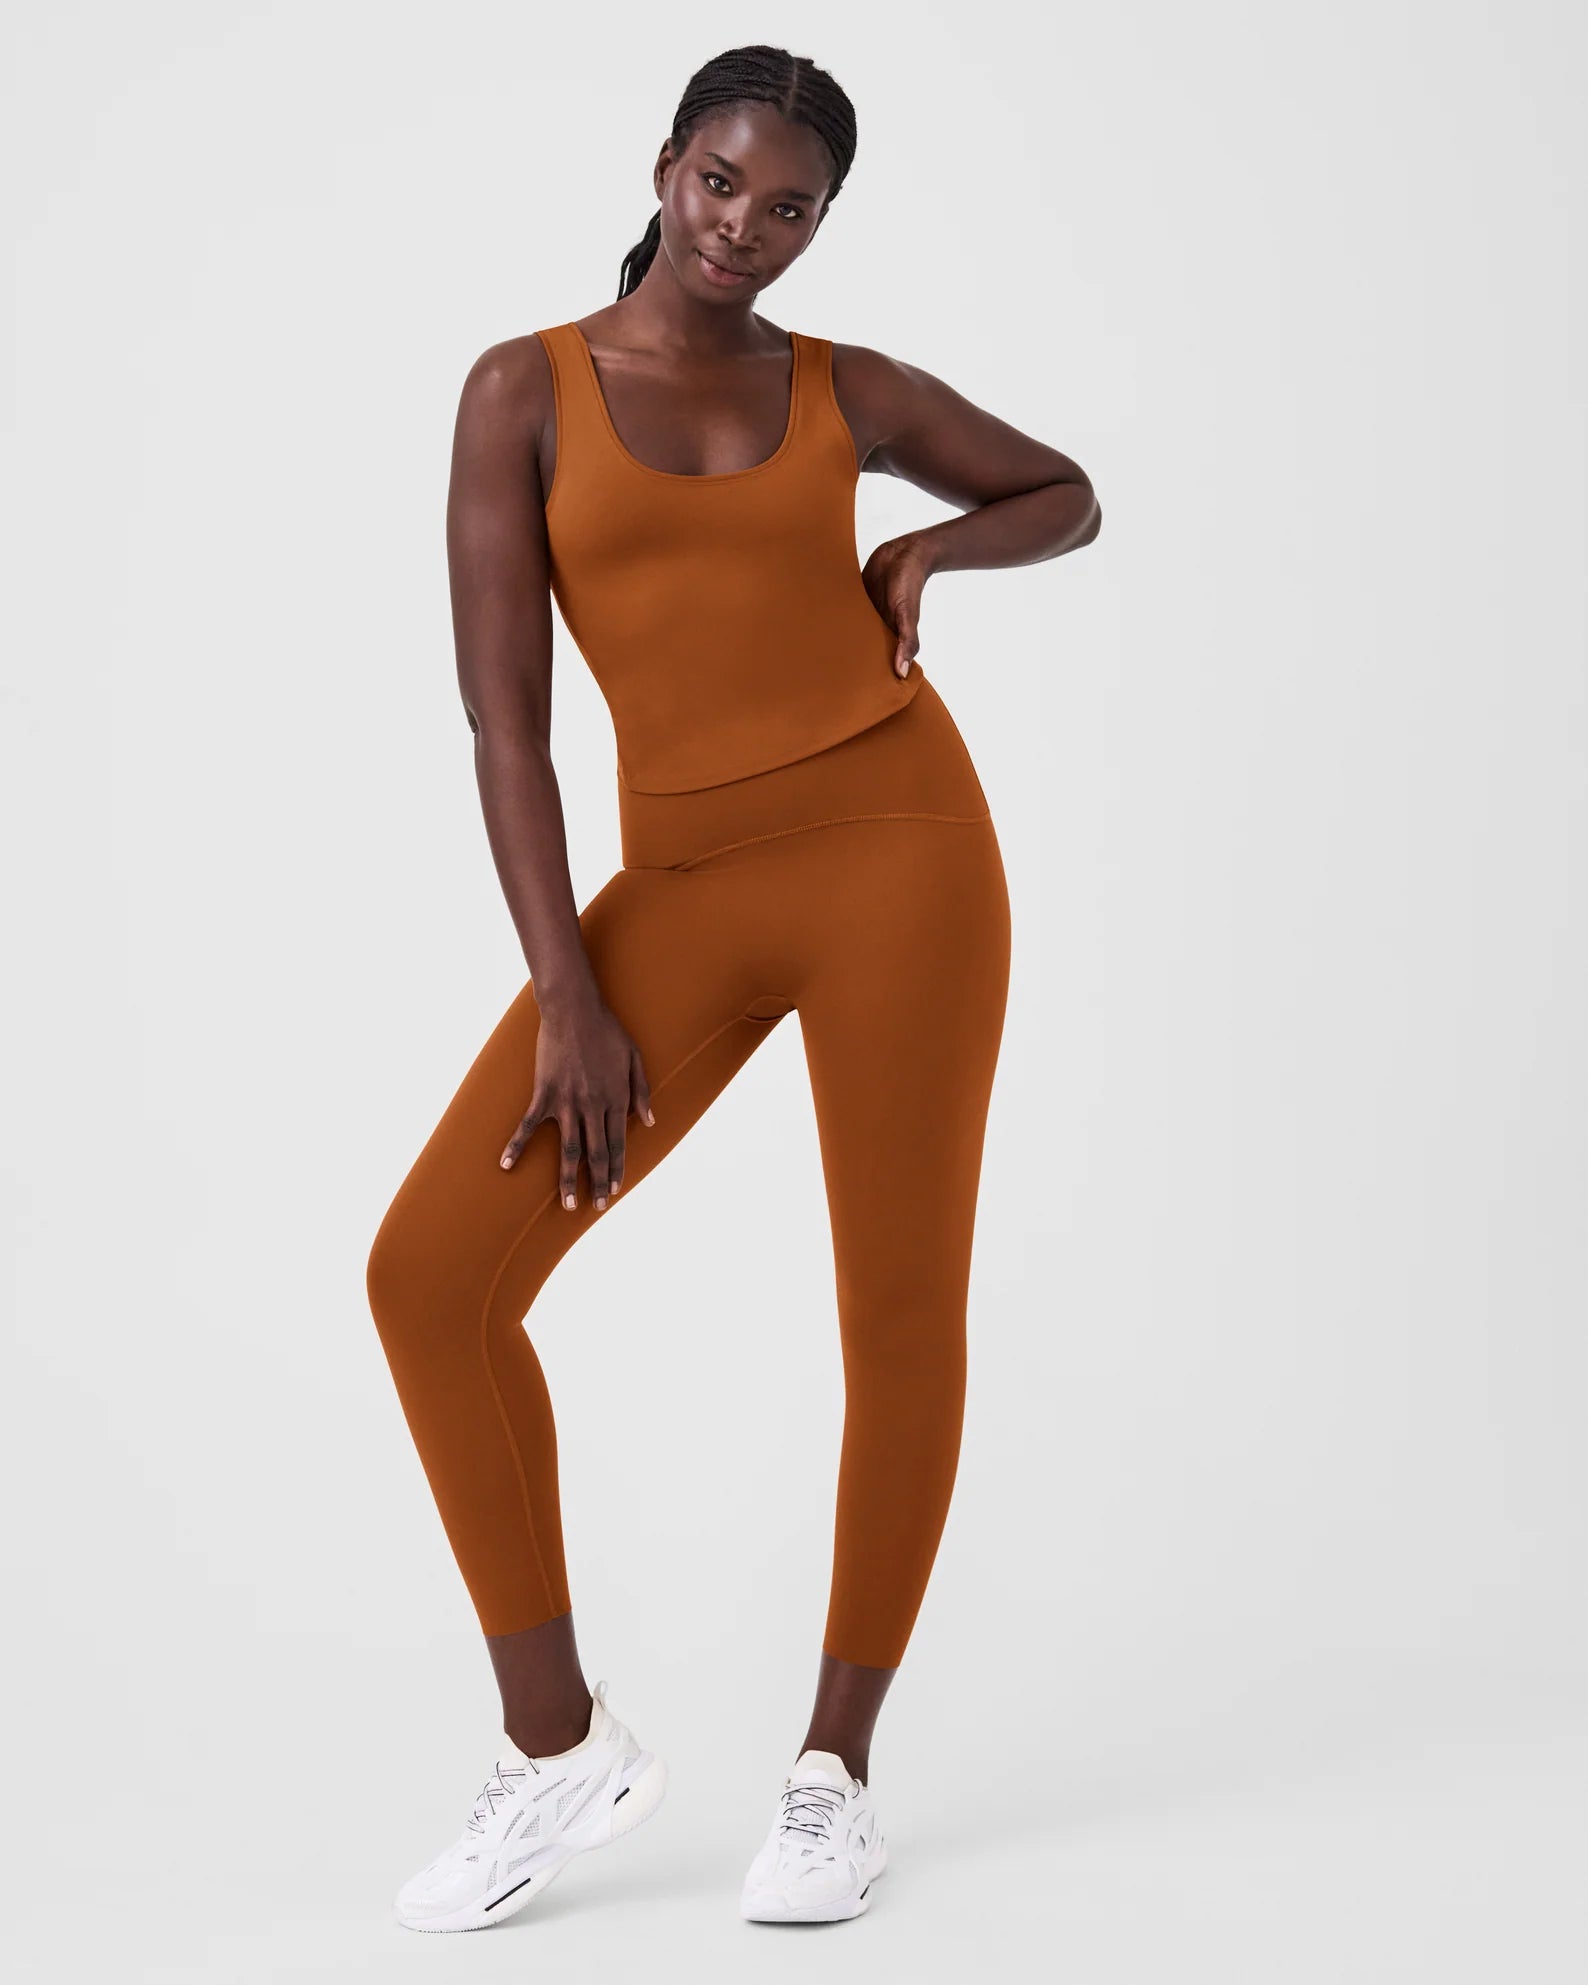 Booty Boost® Perfect Pocket Active Leggings — Wooden Nickel